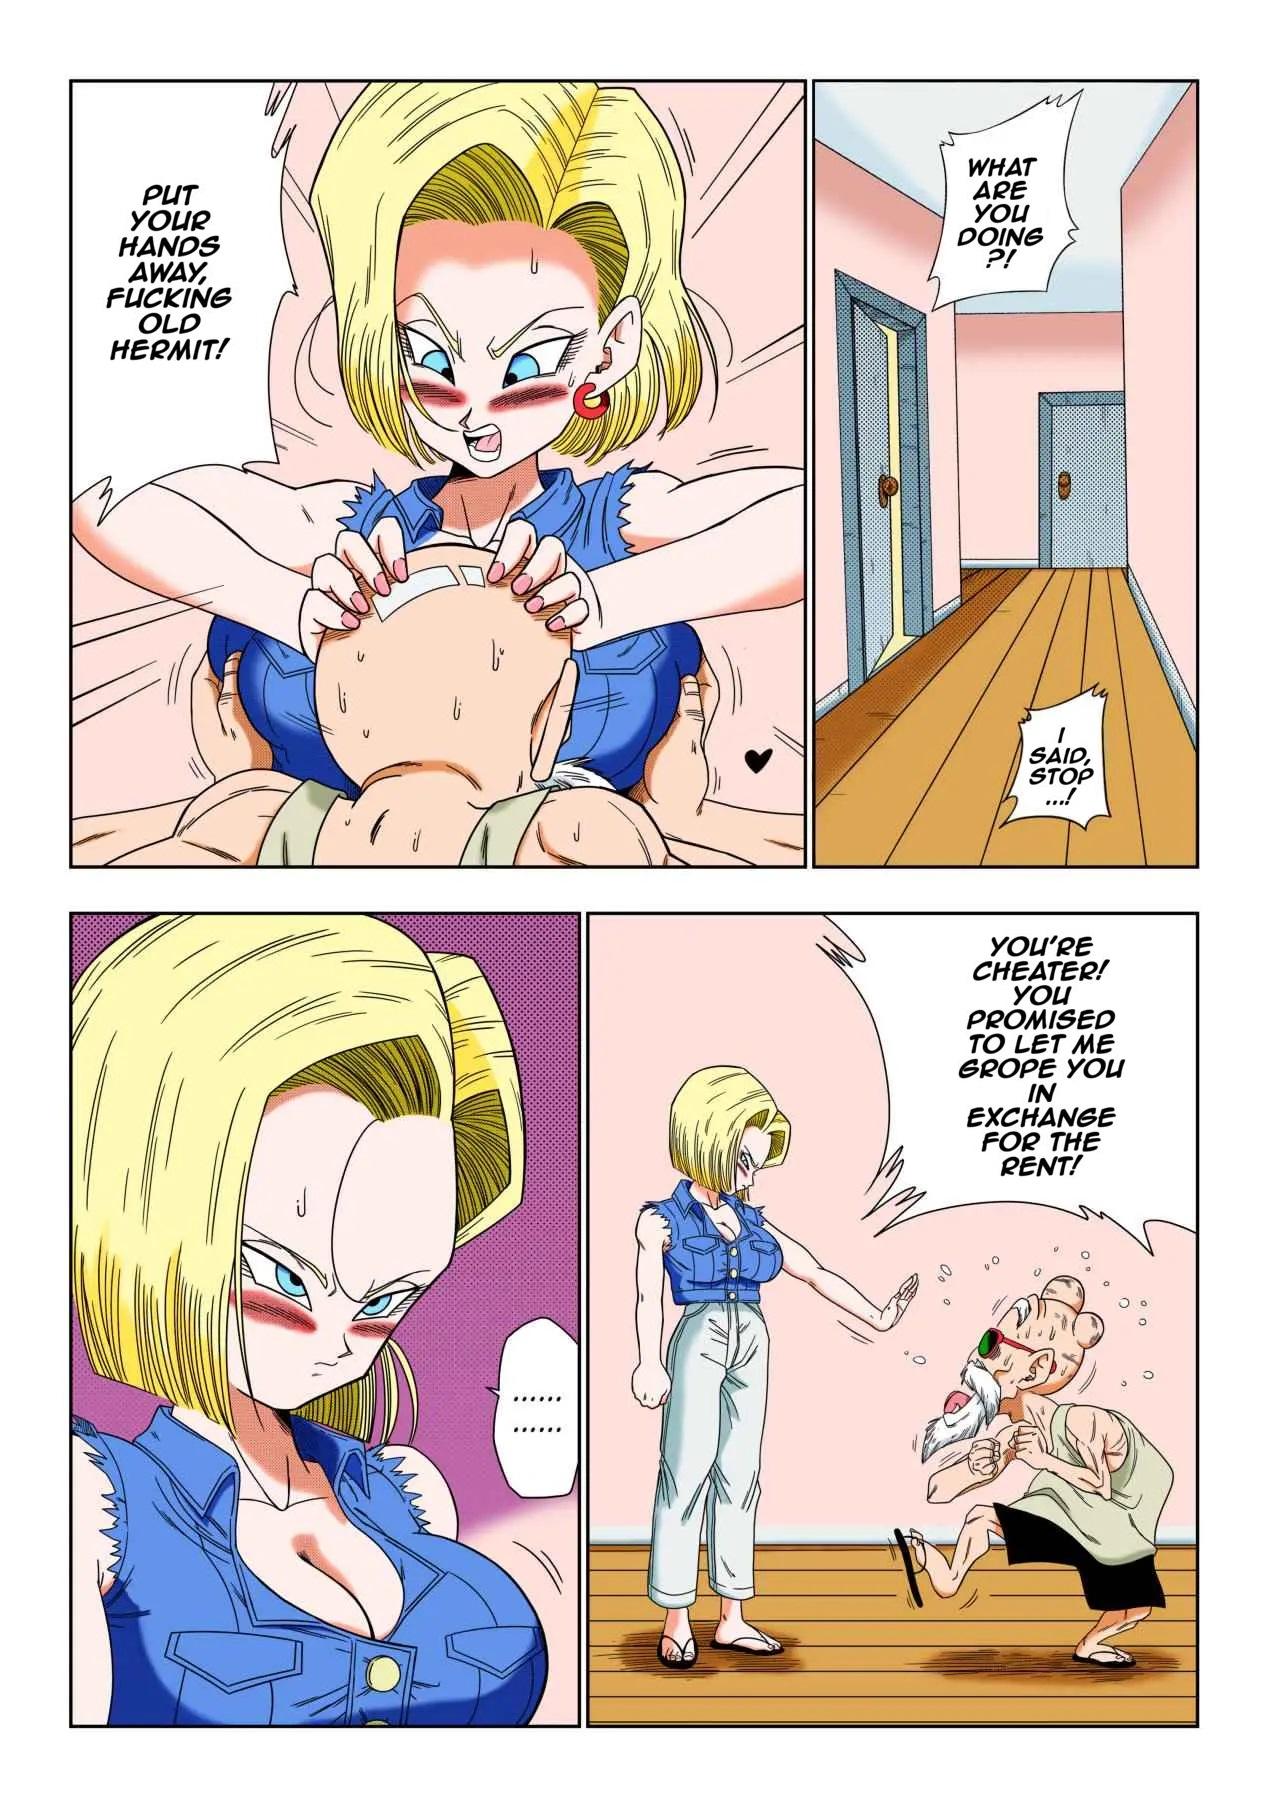 Fingers Android 18 vs Master Roshi - Dragon ball z Gay Oralsex - Page 5